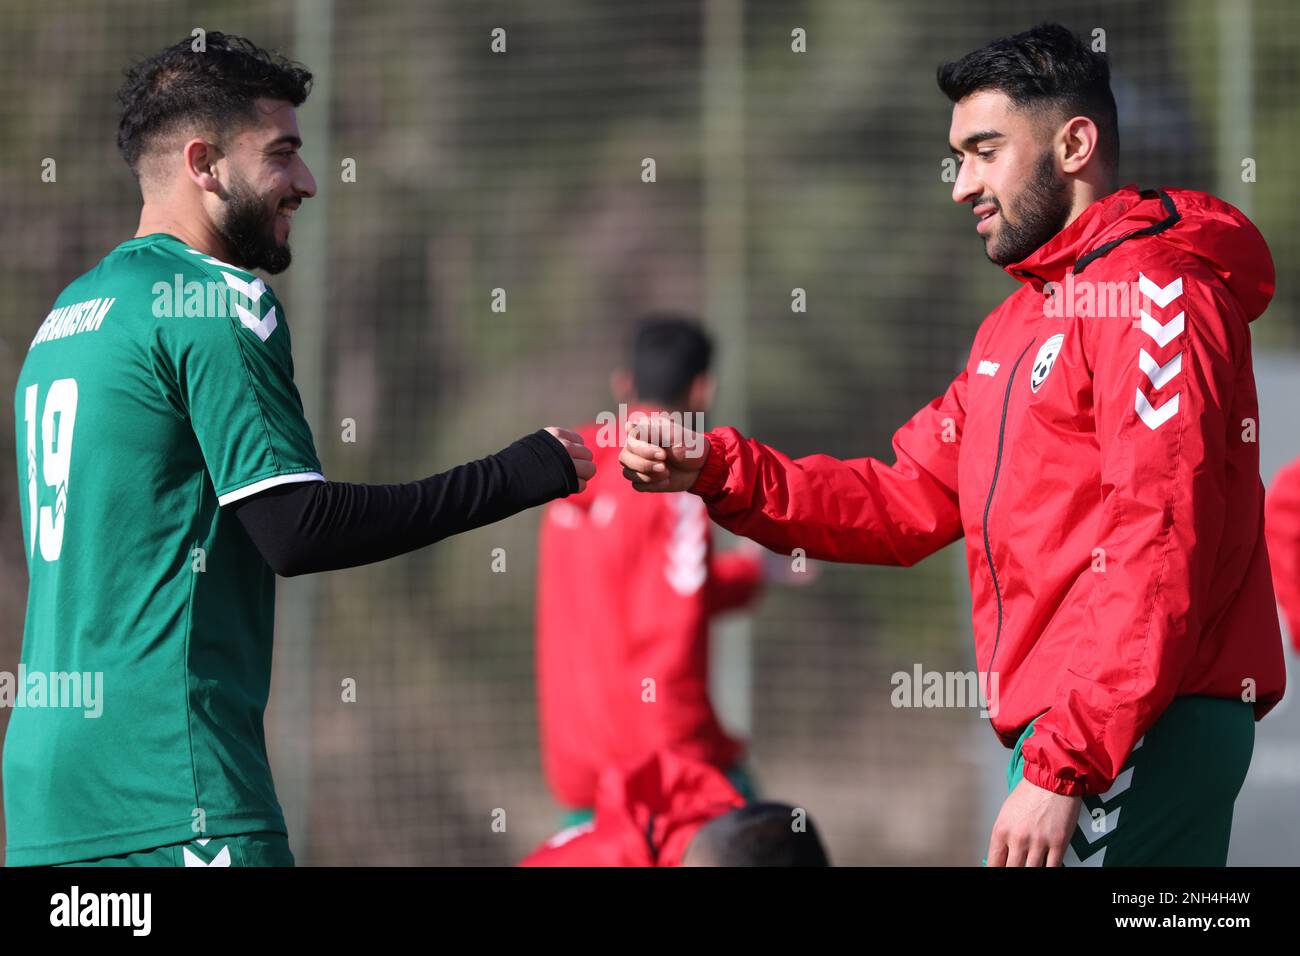 November 2019 - Omid Popalzai (left) and Maziar Kouhyar (righ) shaking hands during a National Team Training Camp in Antalya Turkey Stock Photo